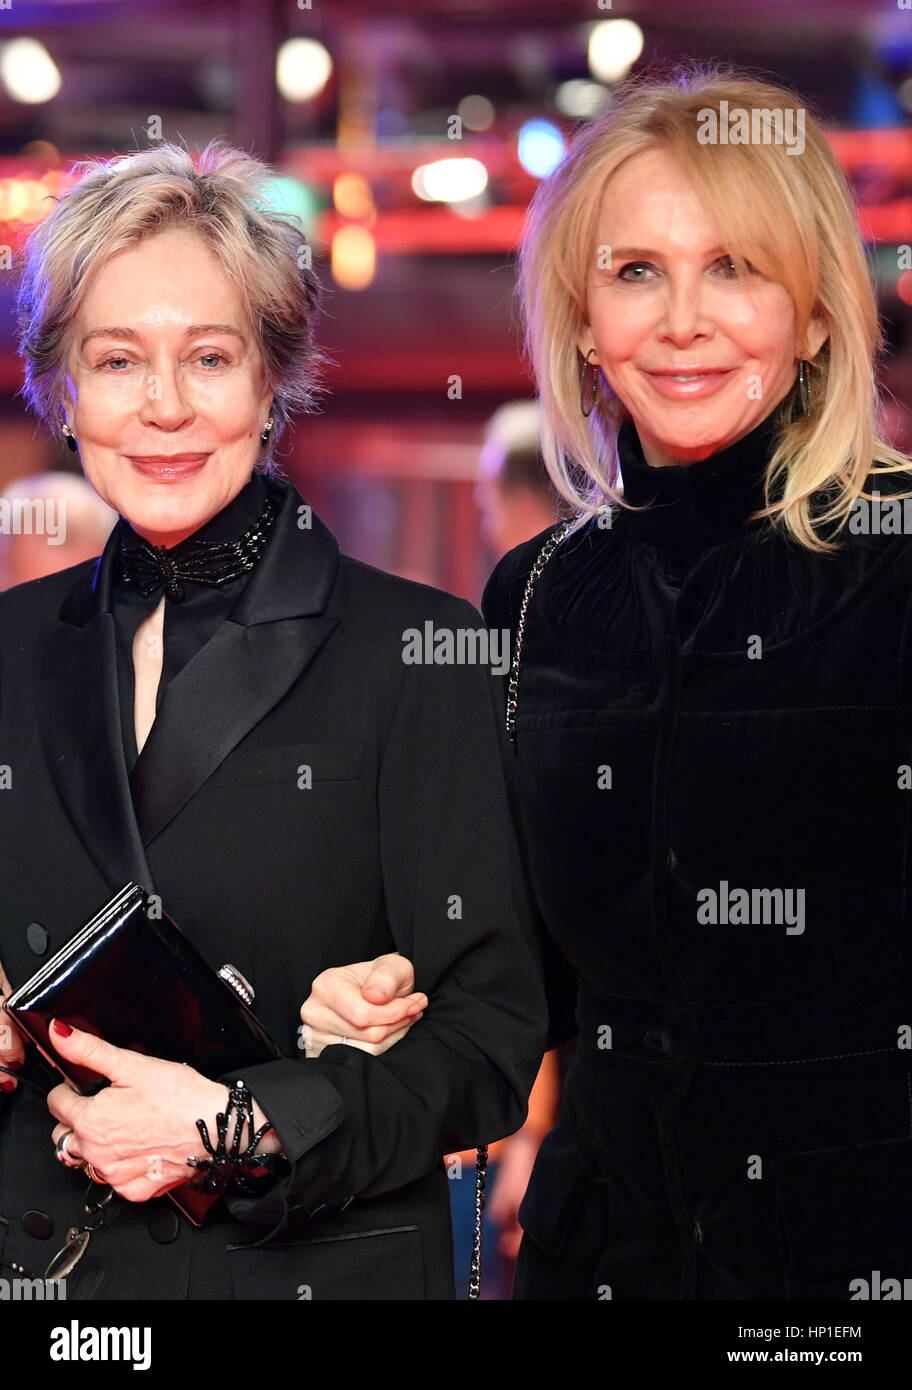 Berlin, Germany. 16th Feb, 2017. Actress Trudie Styler (R) and Italian costume designer Milena Canonero at the 67th Berlinale Film Festival for the Honorary Golden Bear prize for lifetime achievement award ceremony in Berlin, Germany, 16 February 2017. Canonero won the award. Photo: Jens Kalaene/dpa-Zentralbild/dpa/Alamy Live News Stock Photo